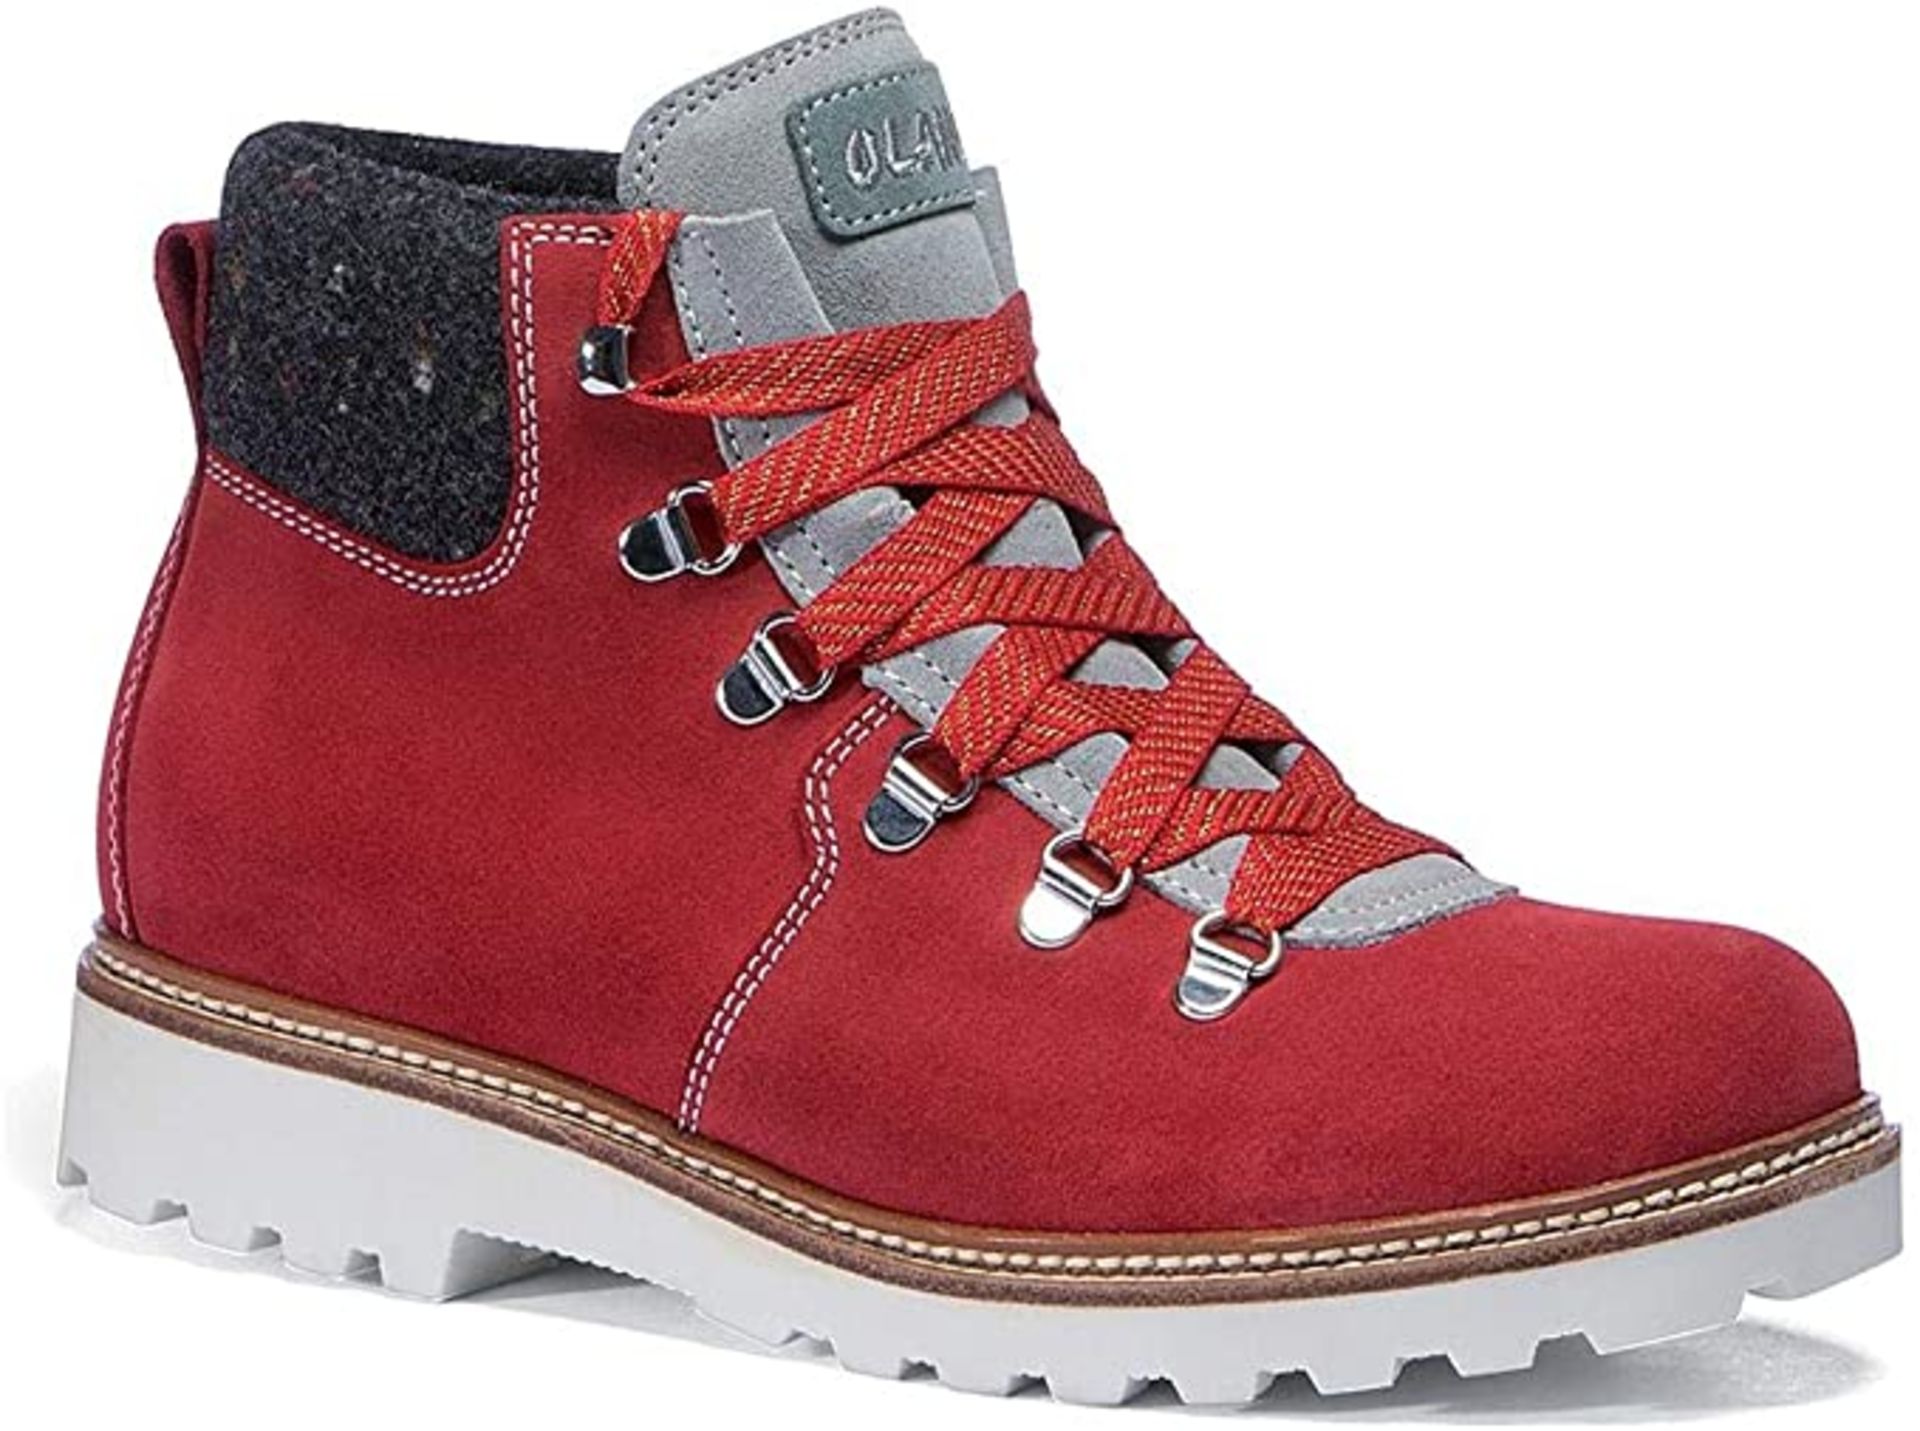 1 x Pair of Designer Olang Merano BTX 815 Rosso Women's Winter Boots - Euro Size 41 - Brand New - Image 2 of 4